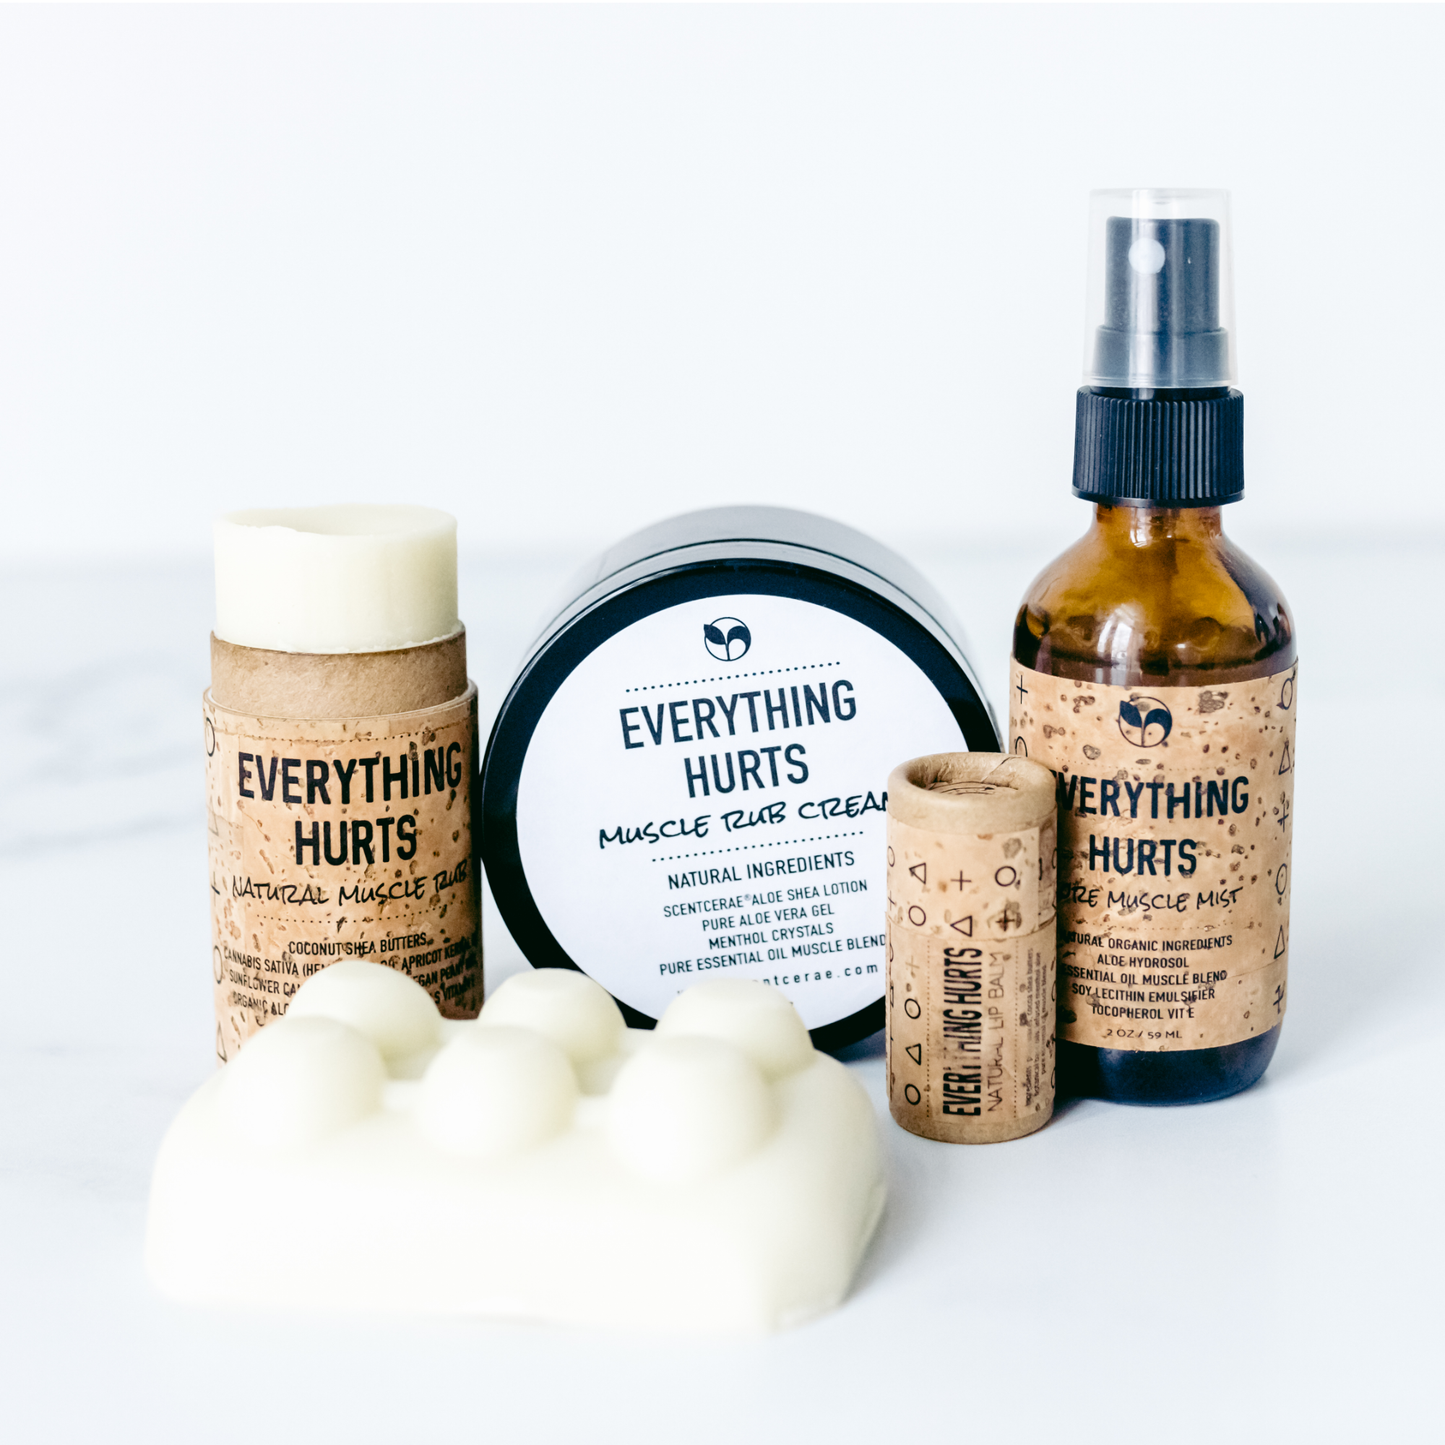 EVERYTHING HURTS Sore Muscle spray: 2 oz